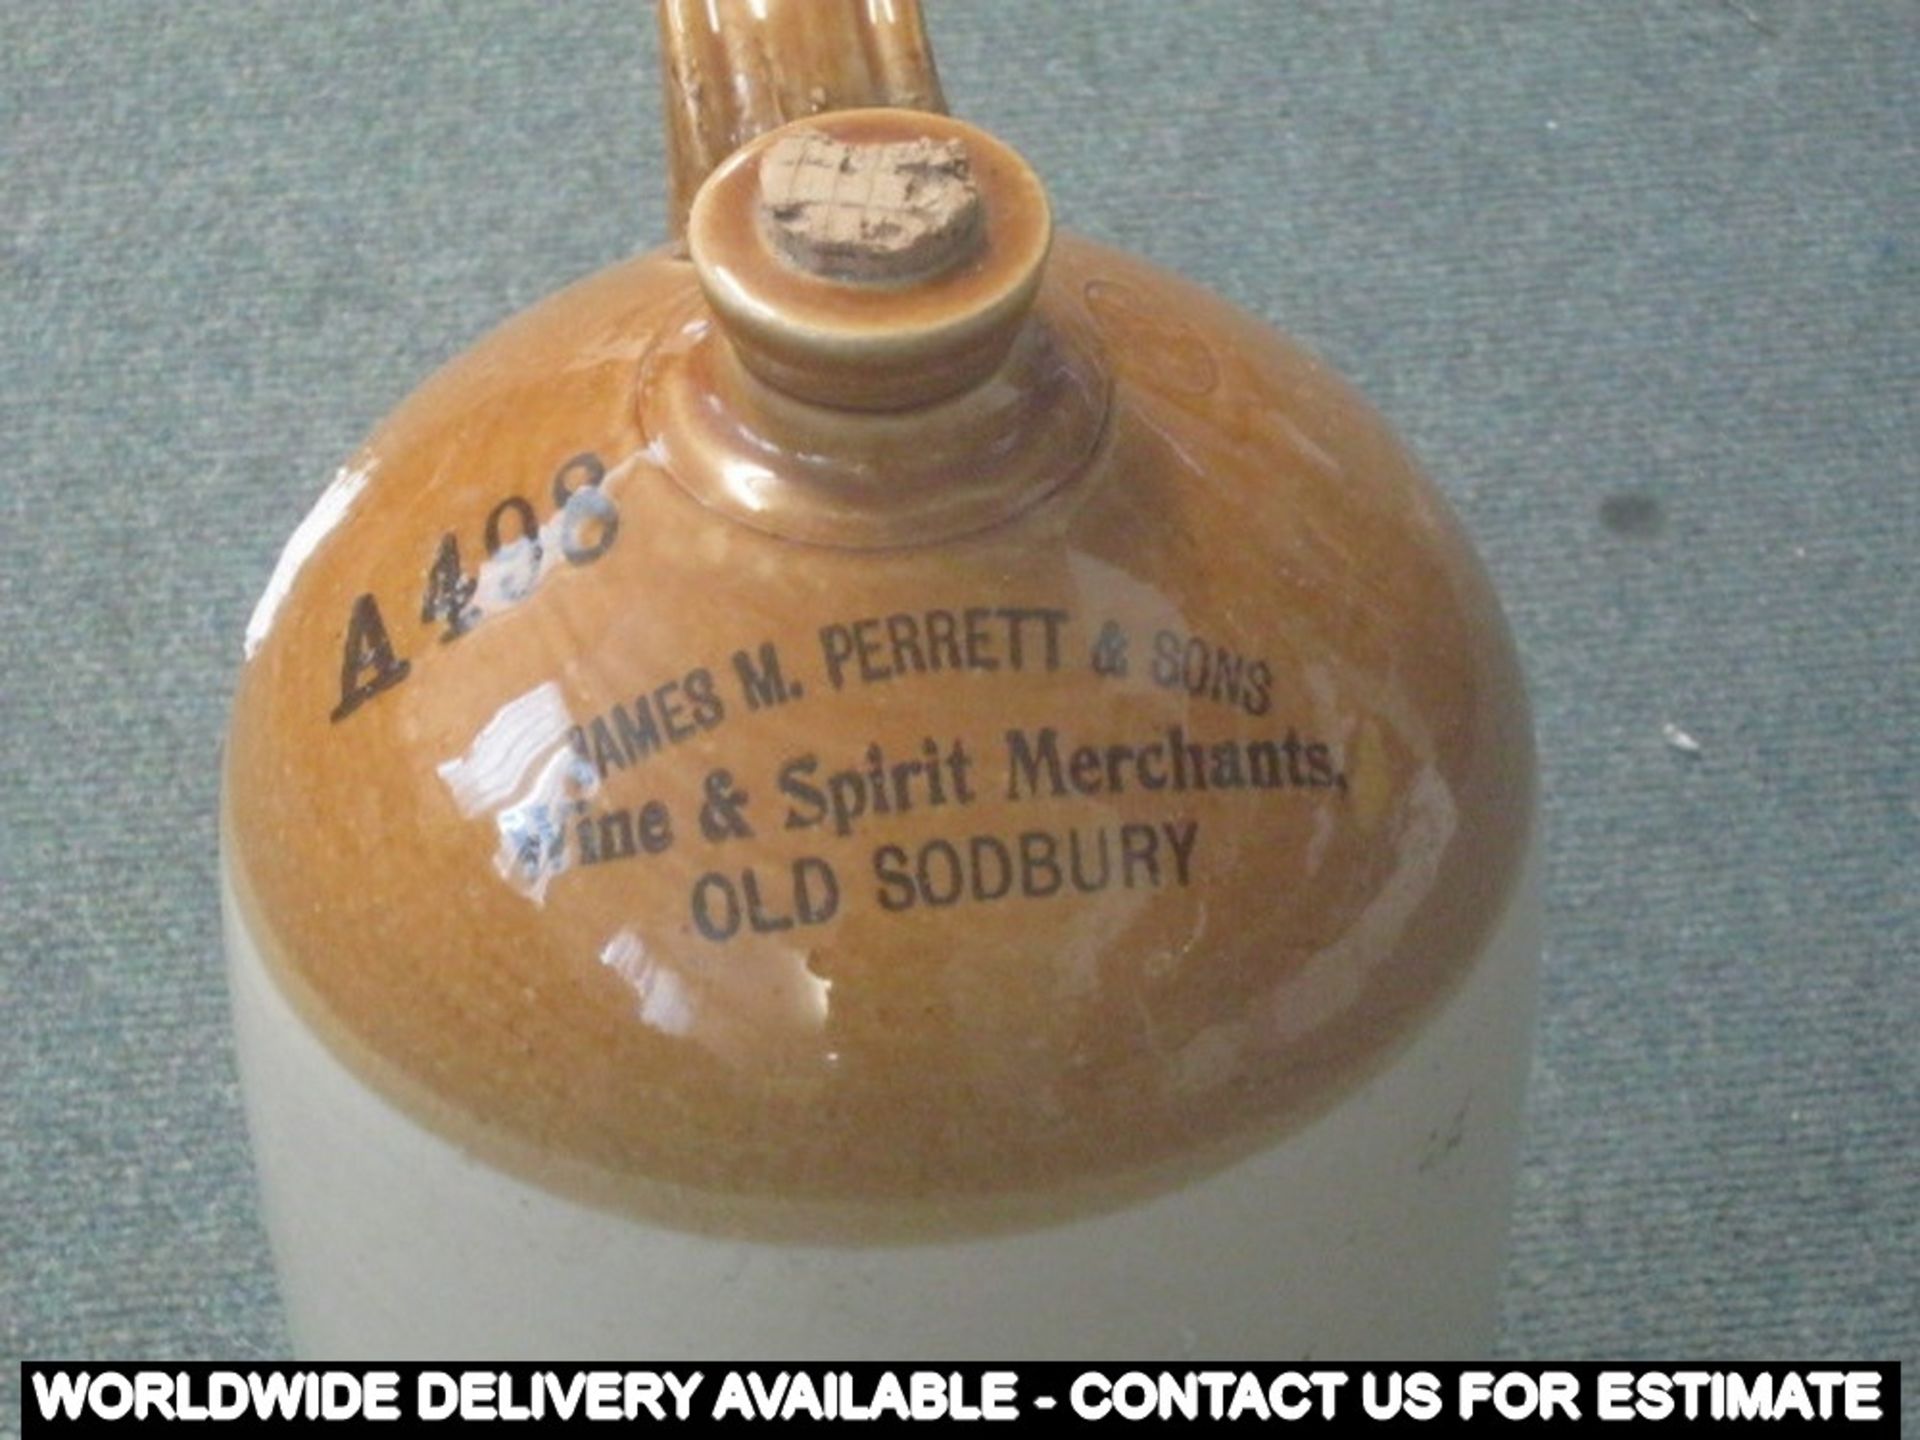 Stoneware flagon and jar - one marked James M Perret & Sons of Old Sodbury A498 - Image 2 of 2